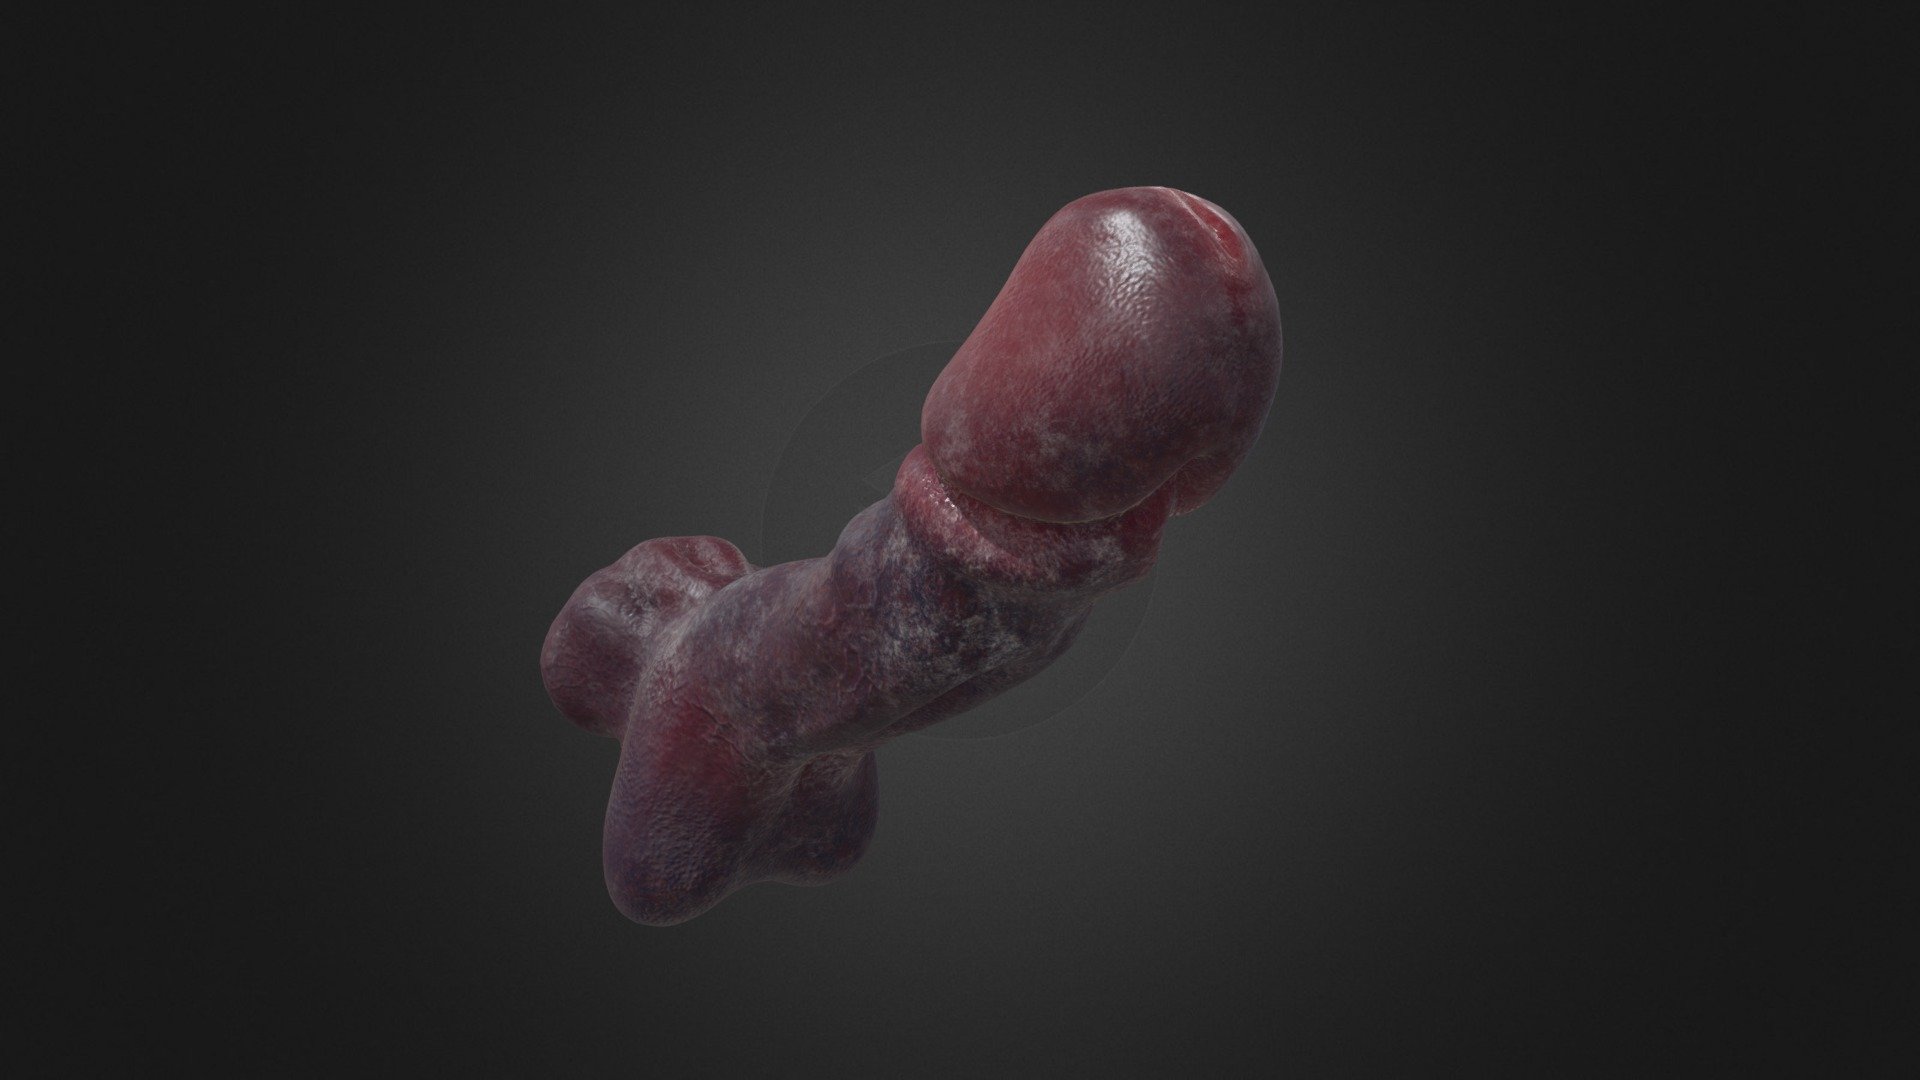 3D object created in zbrush and painted in substance painter. Pornographic model that refers to monstrous features 3d model